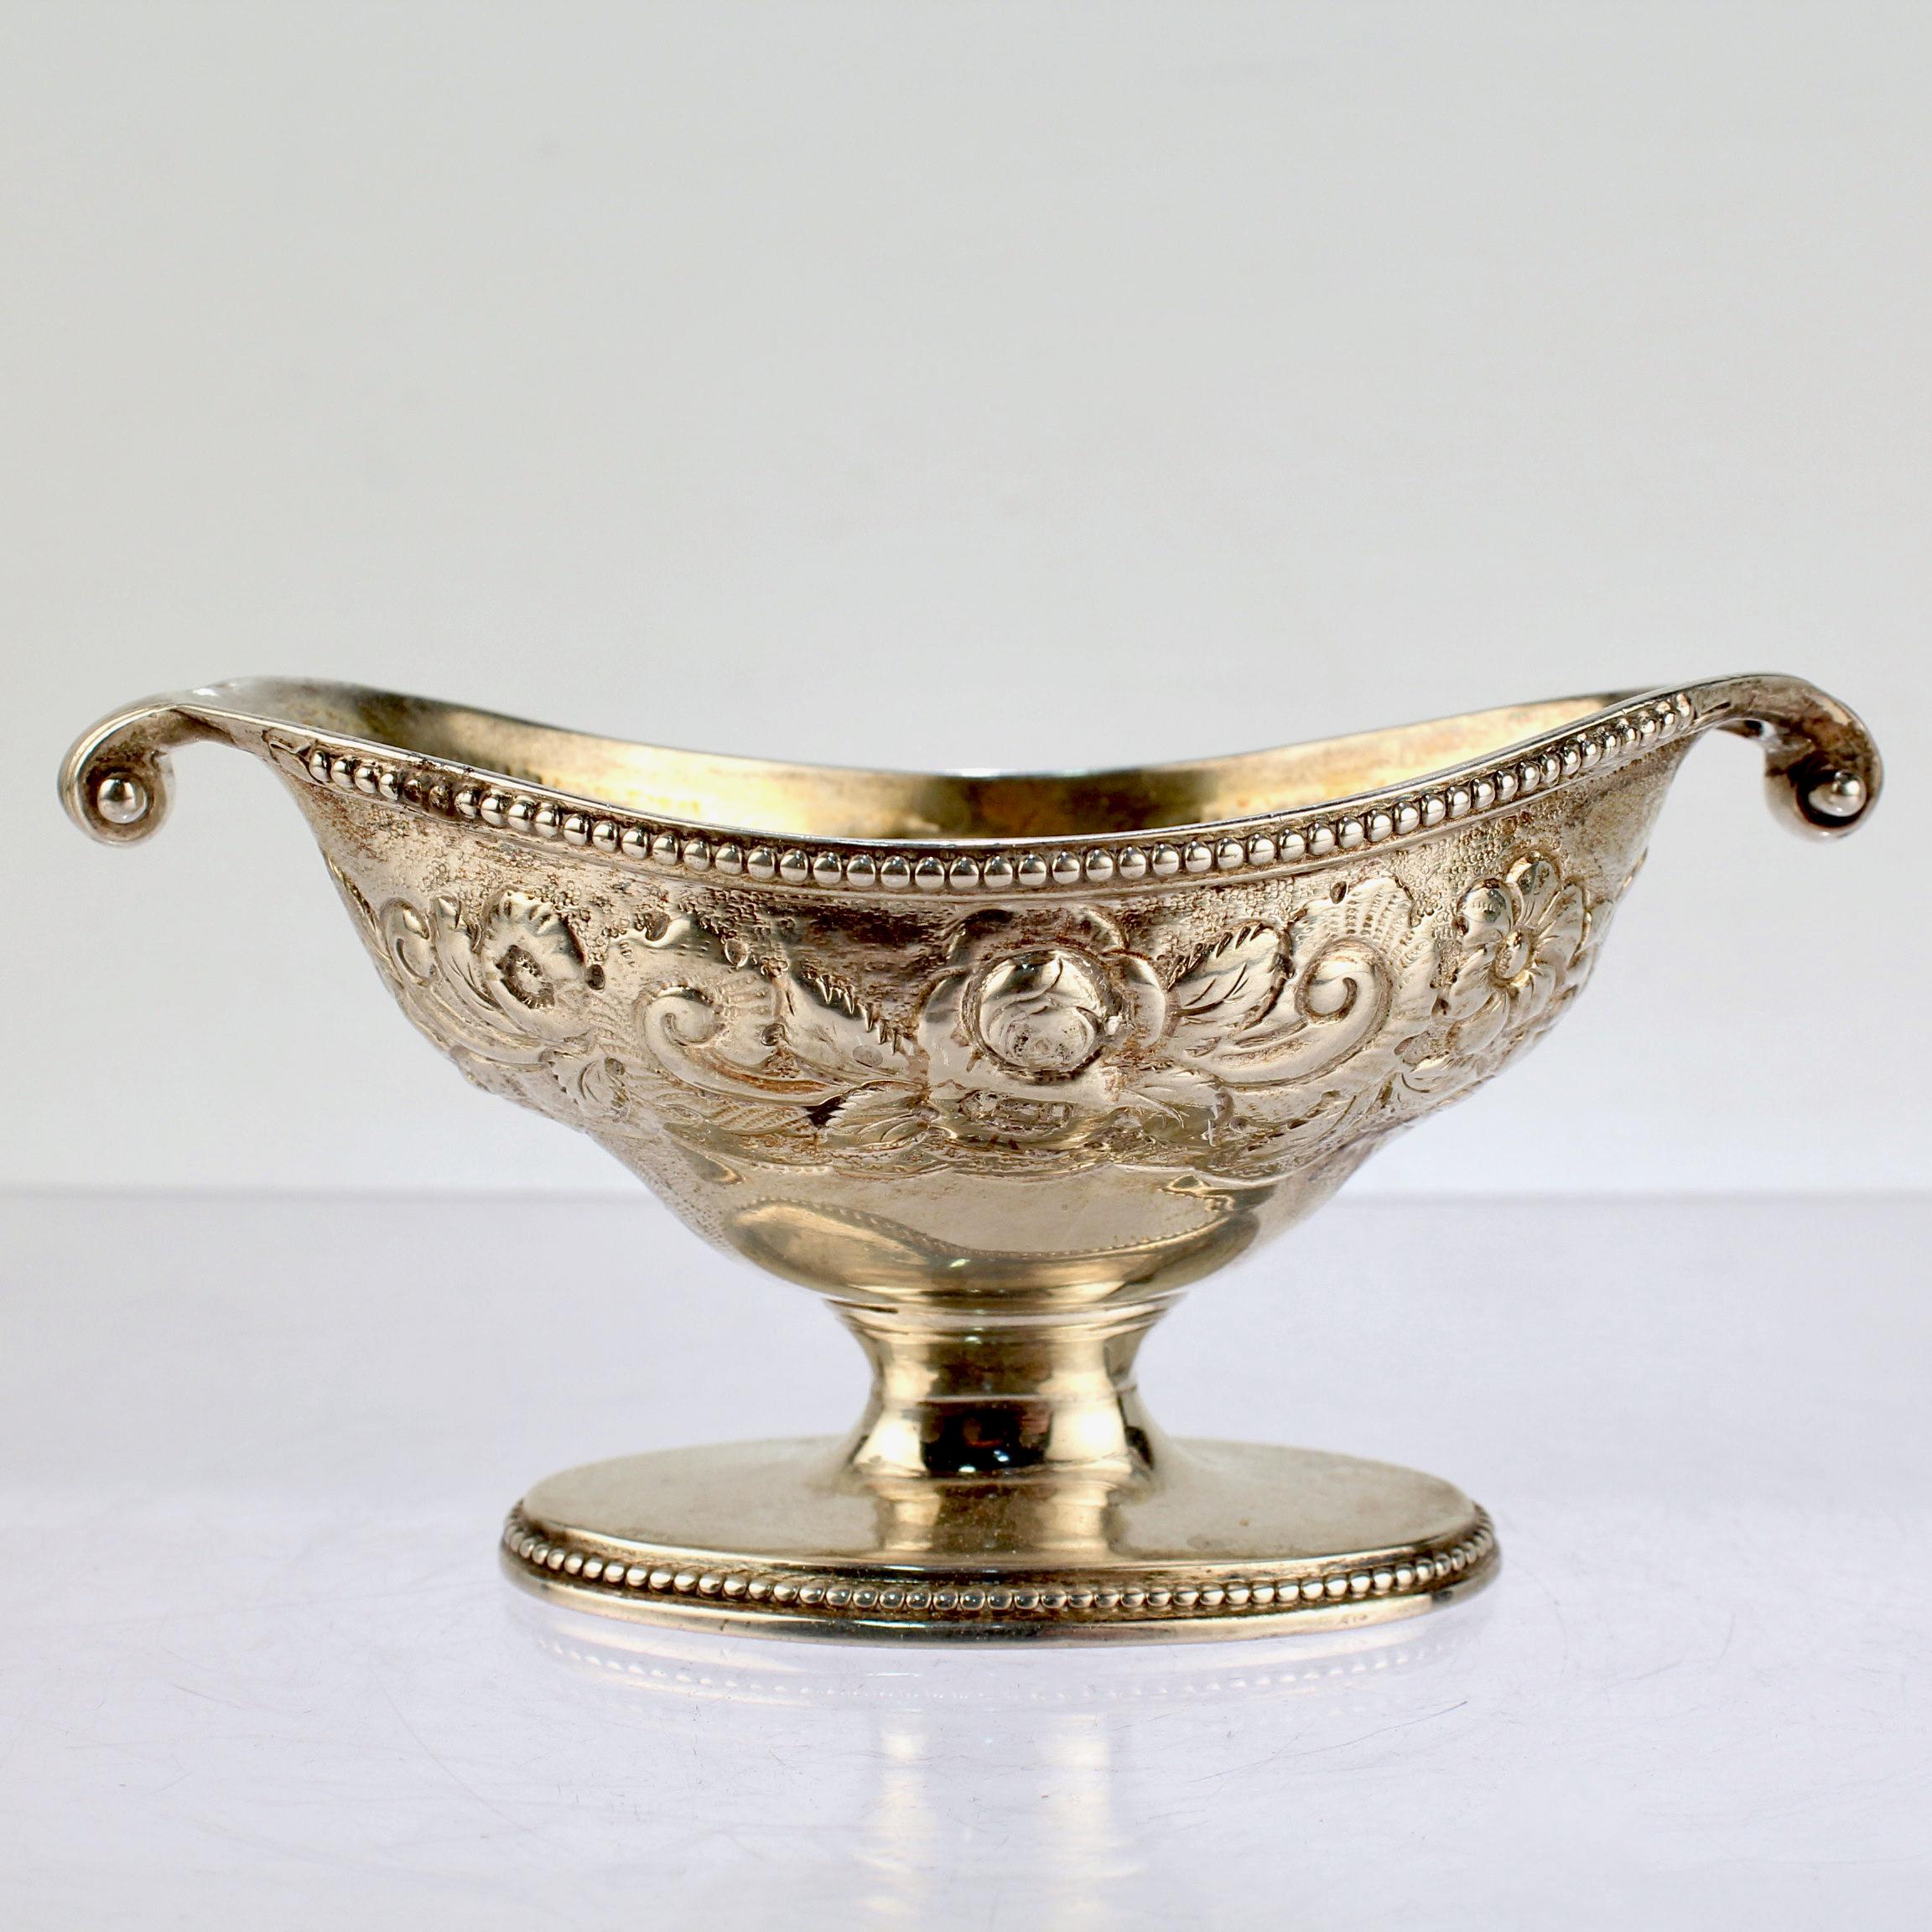 A fine antique Georgian salt cellar.

In sterling silver. 

By Robert Hennell I. 

With scroll handles, a beaded edge & foot, repousse decoration around the body, and a central cartouche with an engraved monogram.

Simply a wonderful period salt